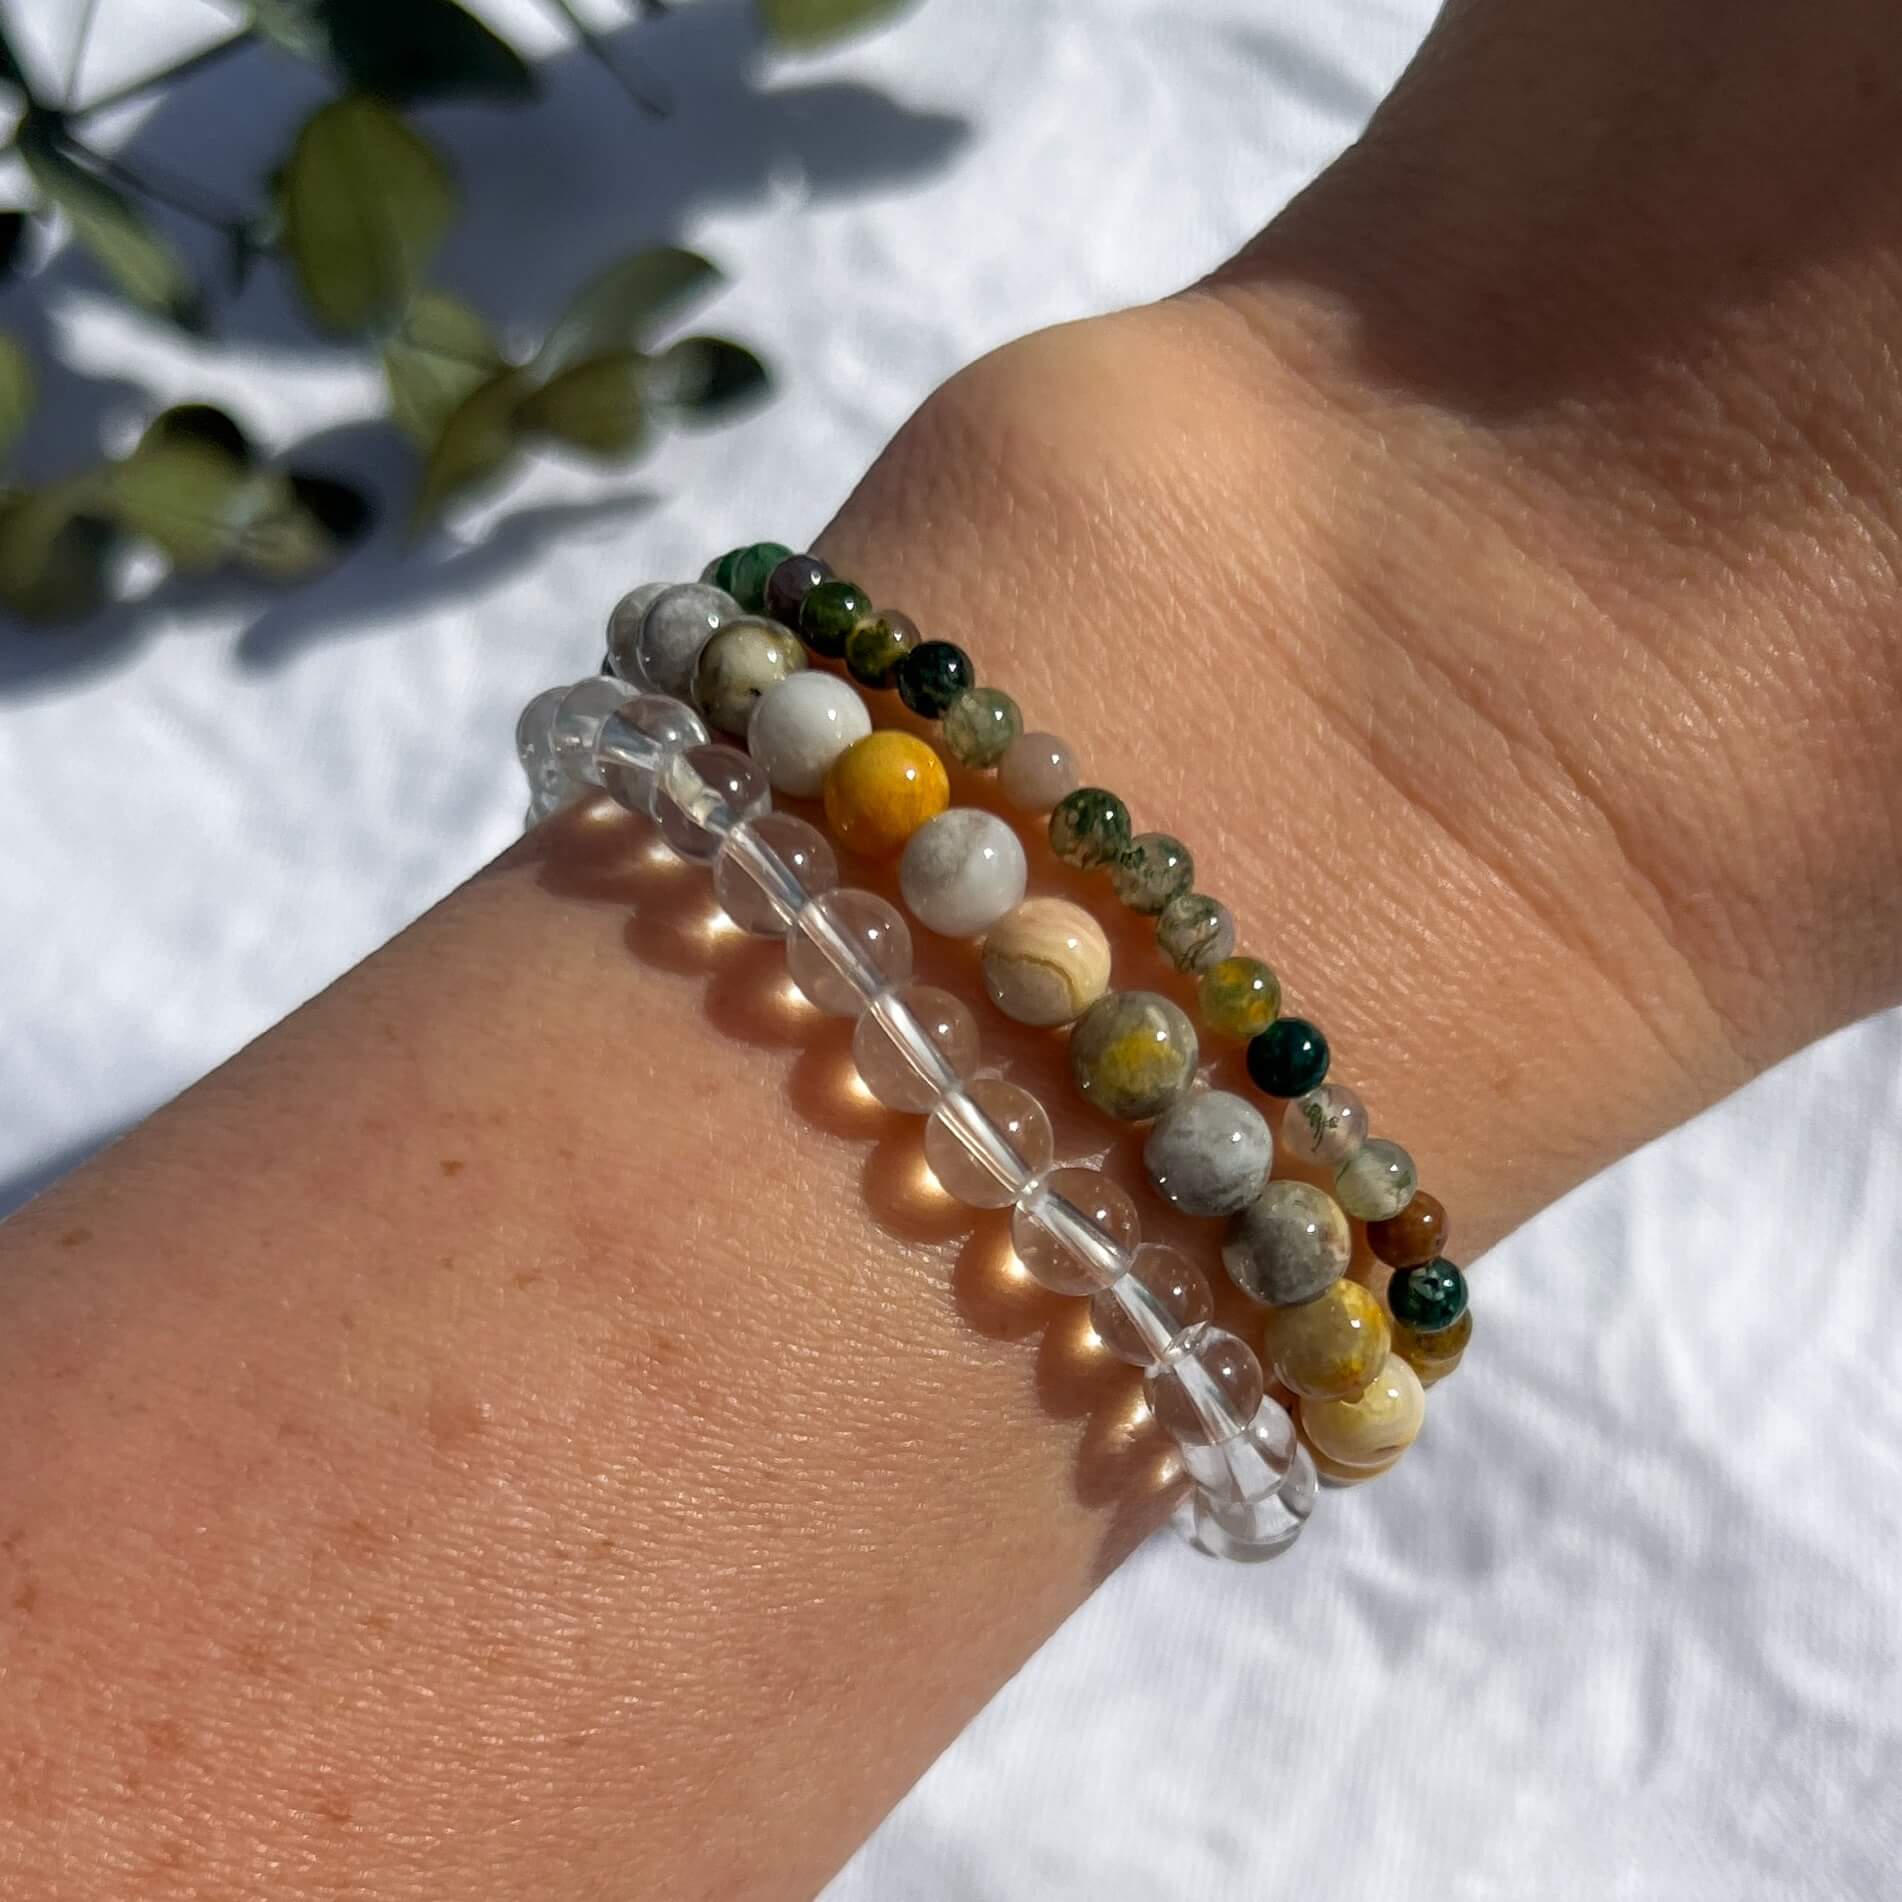 Buy 20 Pieces Natural Gemstone Chakra Bracelets Crystal Healing Chip  Gemstone Stretch Bracelets for Women Reiki Yoga Anxiety at Amazon.in